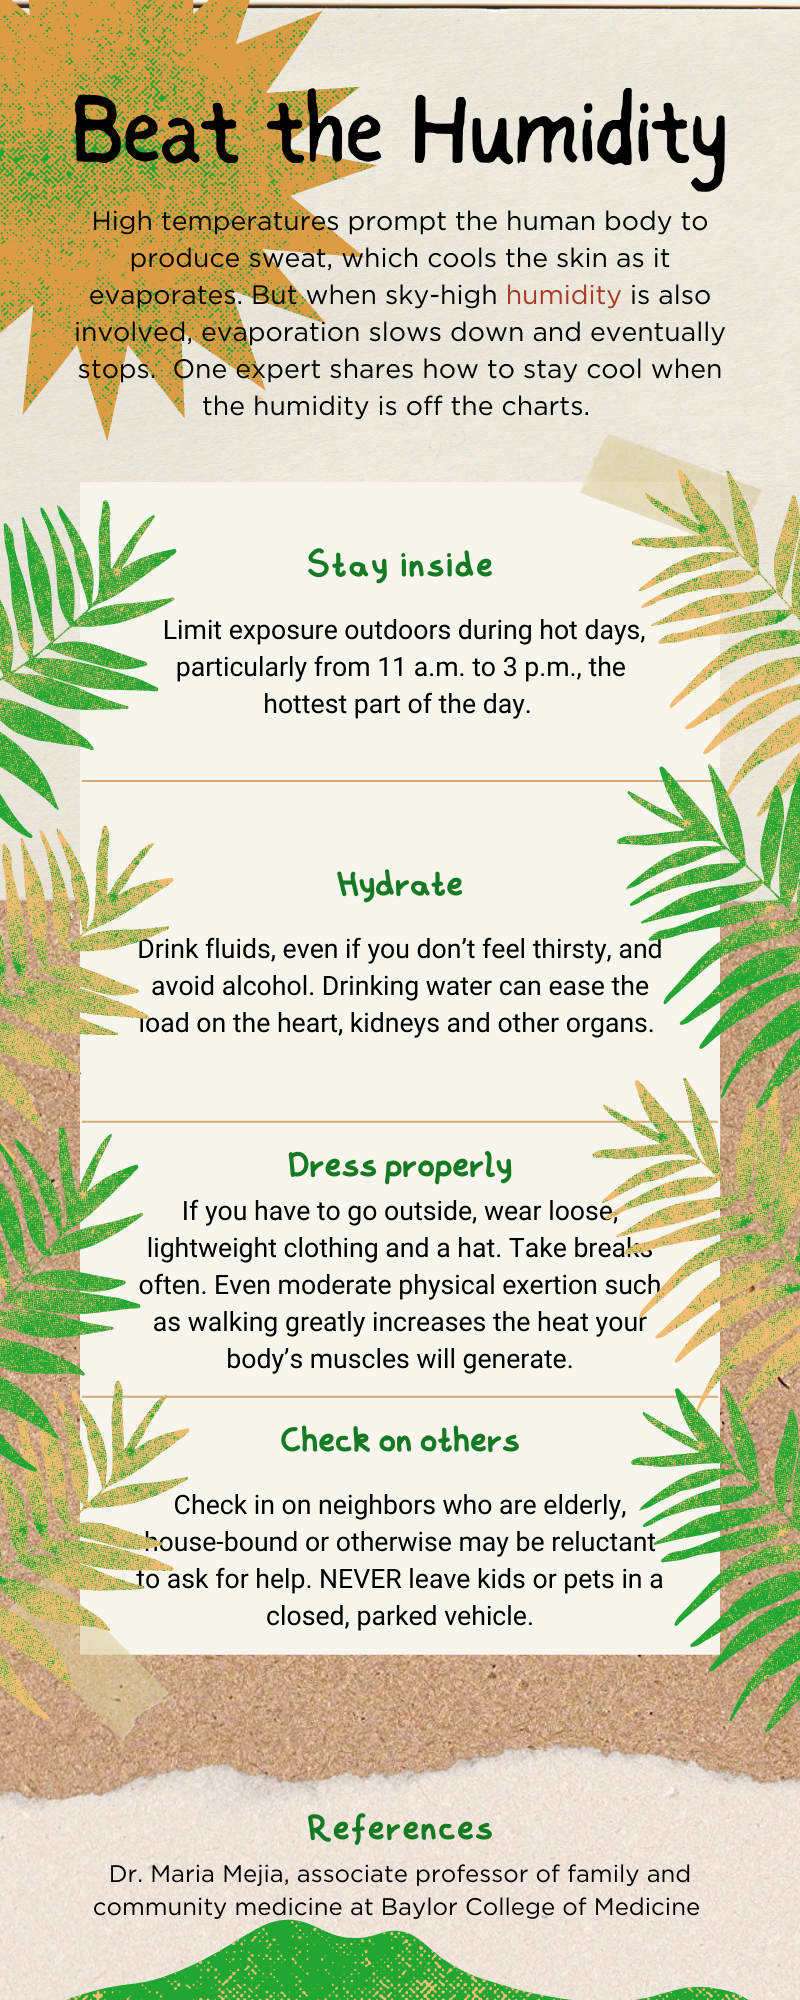 An infographic that reads: Stay Inside: Limit exposure outdoors during hot days, particularly from 11 a.m. to 3 p.m., the hottest part of the day. Hydrate: Drink fluids, even if you don’t feel thirsty, and avoid alcohol. Drinking water can ease the load on the heart, kidneys and other organs. Dress Properly: If you have to go outside, wear loose, lightweight clothing and a hat. Take breaks often. Even moderate physical exertion such as walking greatly increases the heat your body’s muscles will generate. Check on Others: Check in on neighbors who are elderly, house-bound or otherwise may be reluctant to ask for help. Never leave kids or pets in a closed, parked vehicle. References: Dr. Maria Mejia, associate professor of family and community medicine at Baylor.